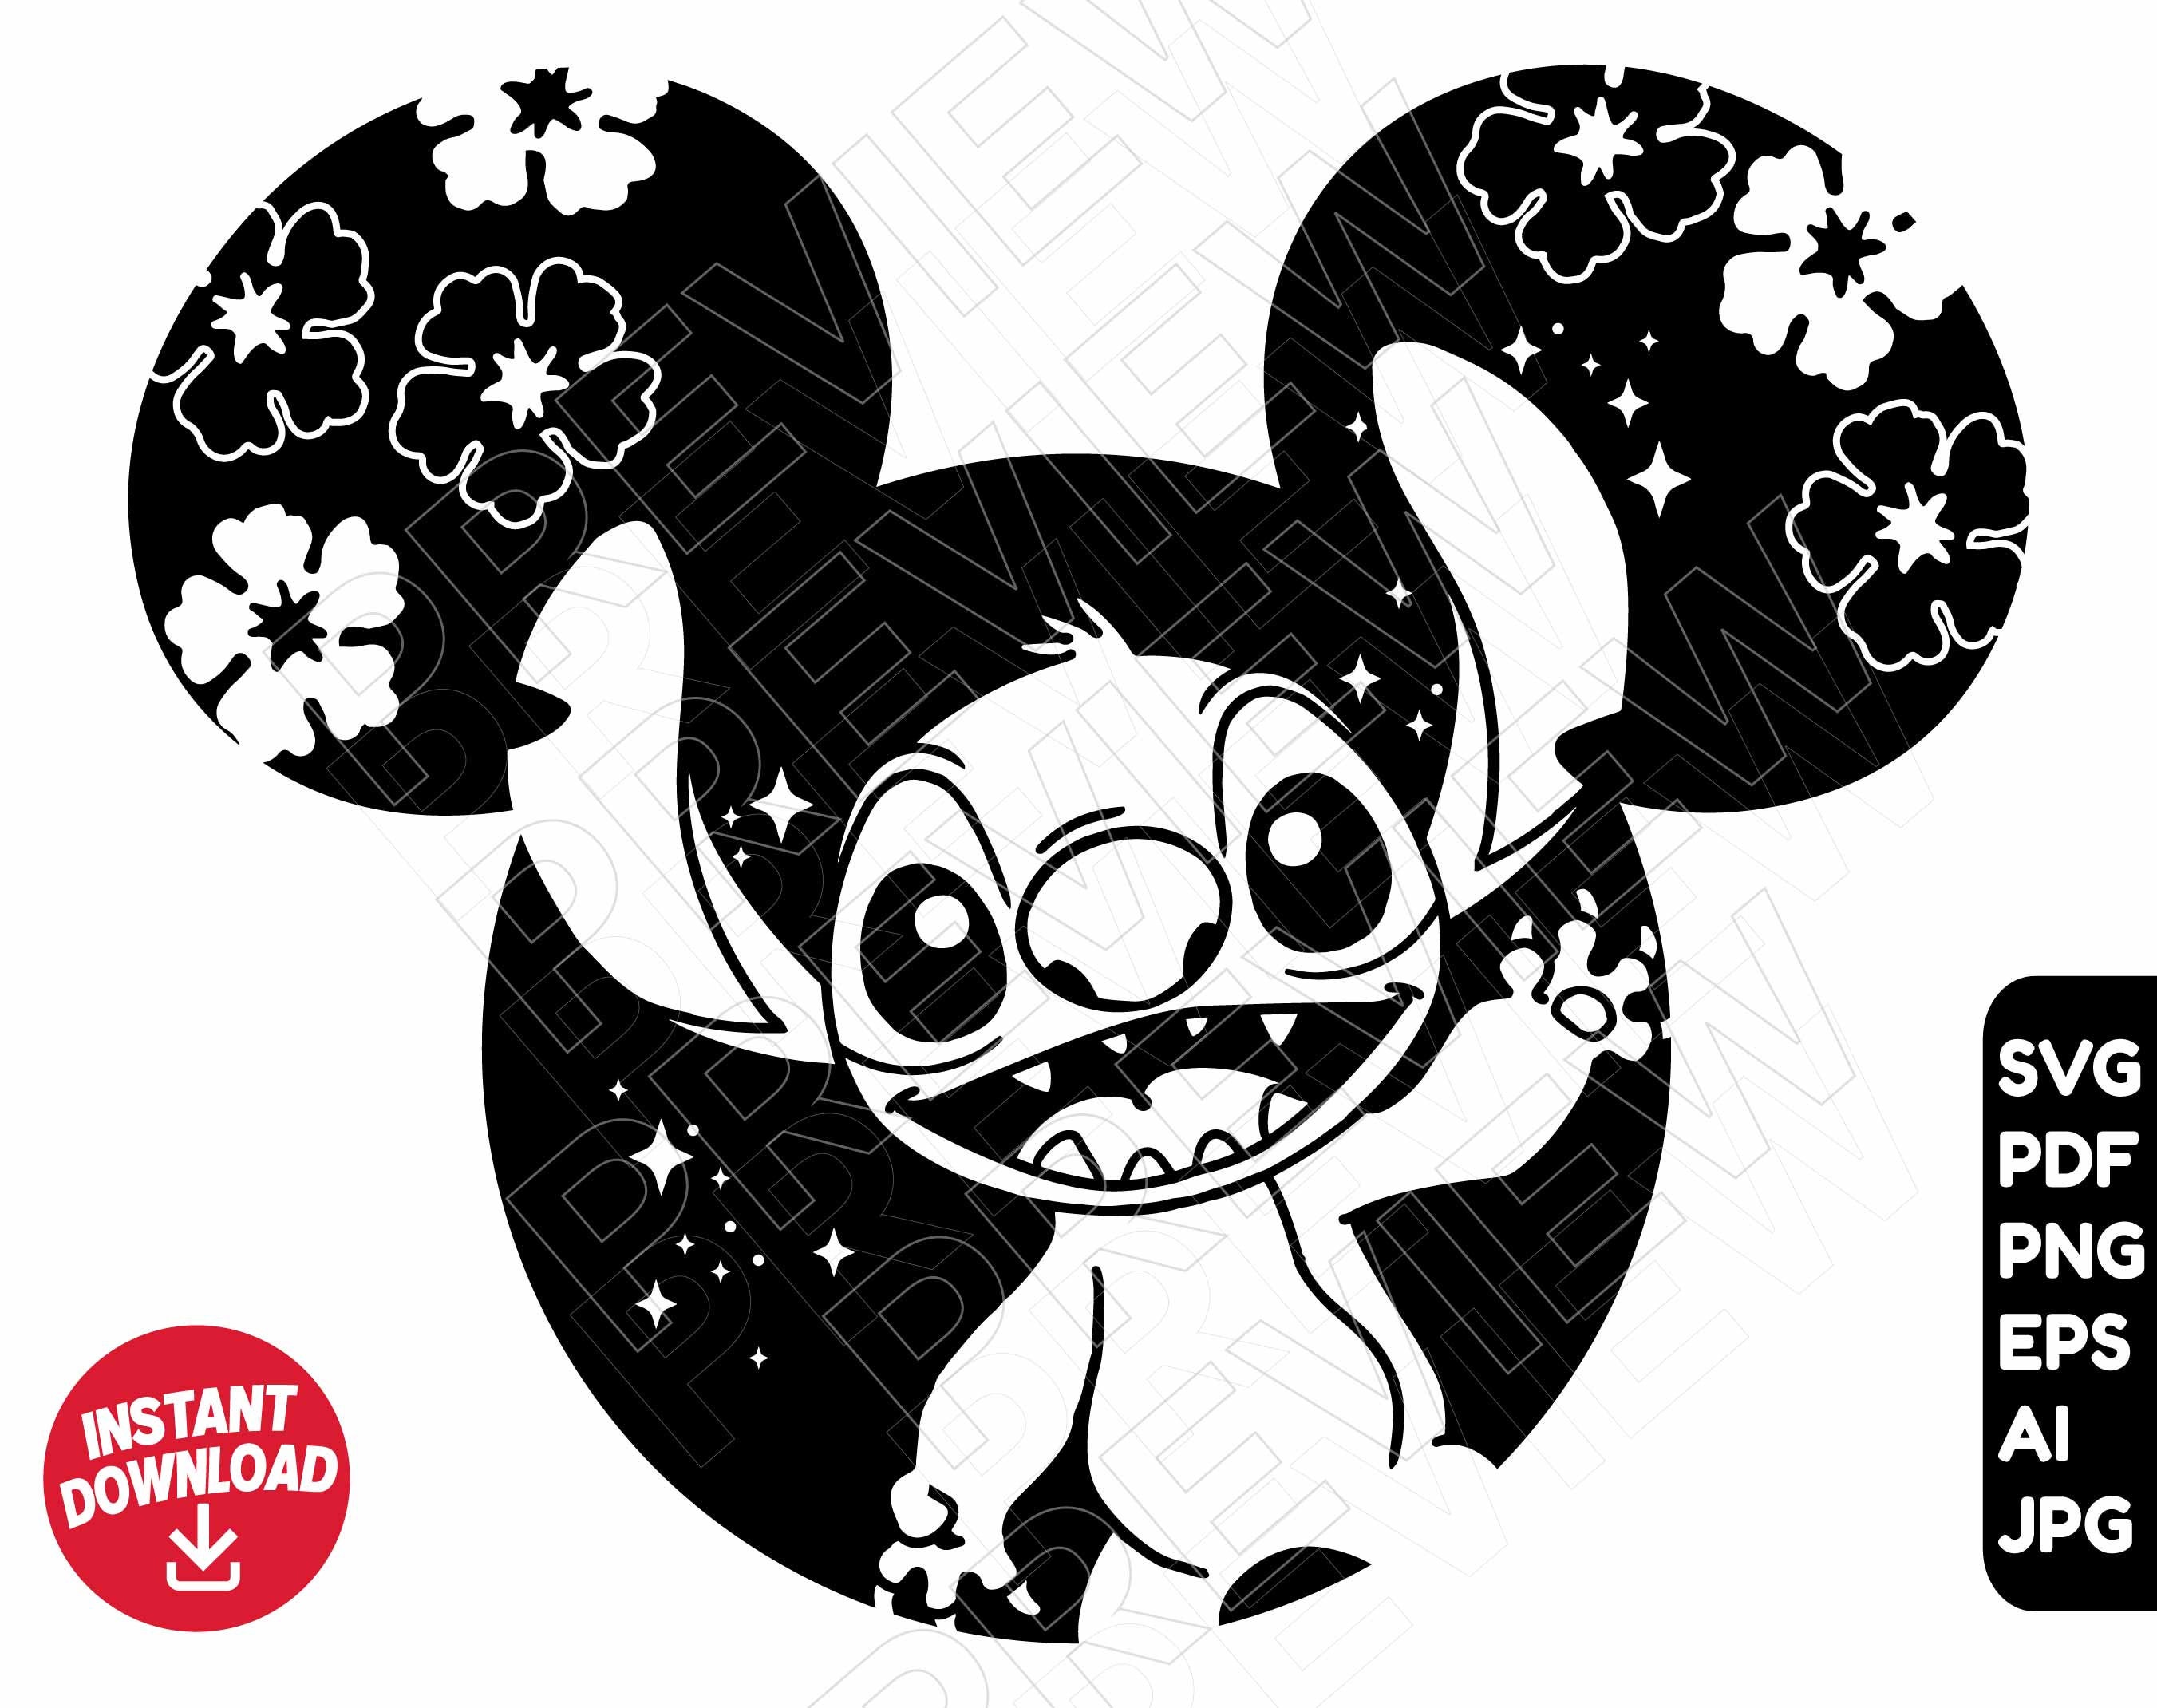 Stitch SVG Disney ears svg png clipart cut file silhouette | Etsy